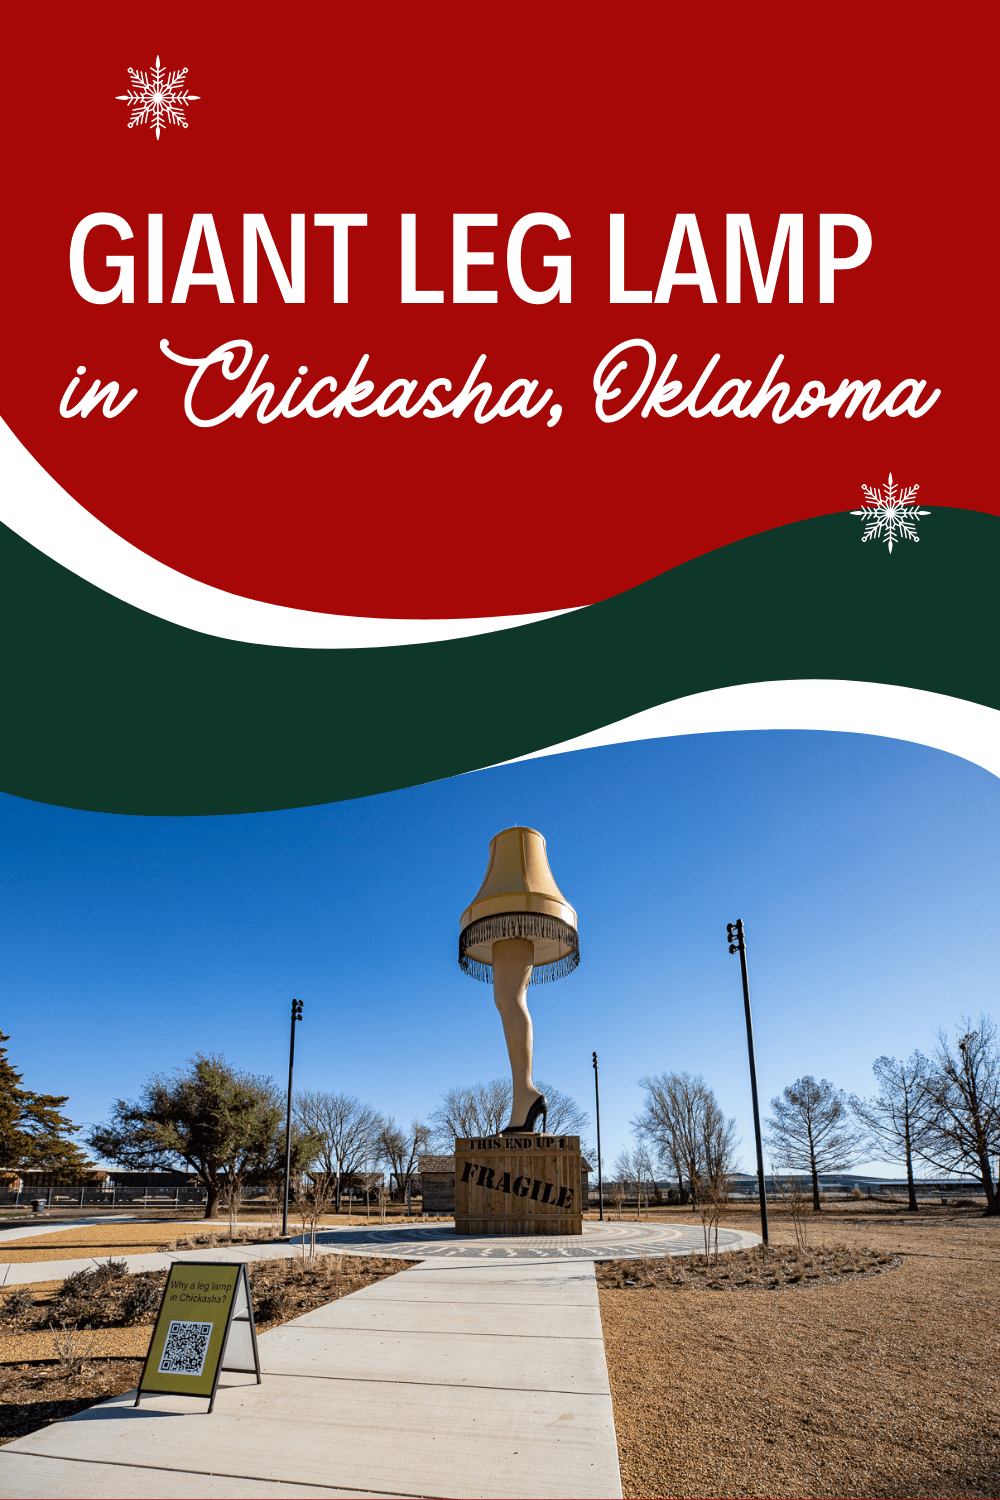 This roadside attraction is so very fraa-jeel-aay you might think you'd find it in Italy. But you'll actually find it in Oklahoma. If you love the movie A Christmas Story, you'll love the Giant Leg Lamp in Chickasha, Oklahoma. Visit this Oklahoma roadside attraction on your holiday road trip or any time of year! It's a fun road trip stop! #RoadTrip #RoadsideAttraction #RoadsideAmerica #AChristmasStory #Christmas